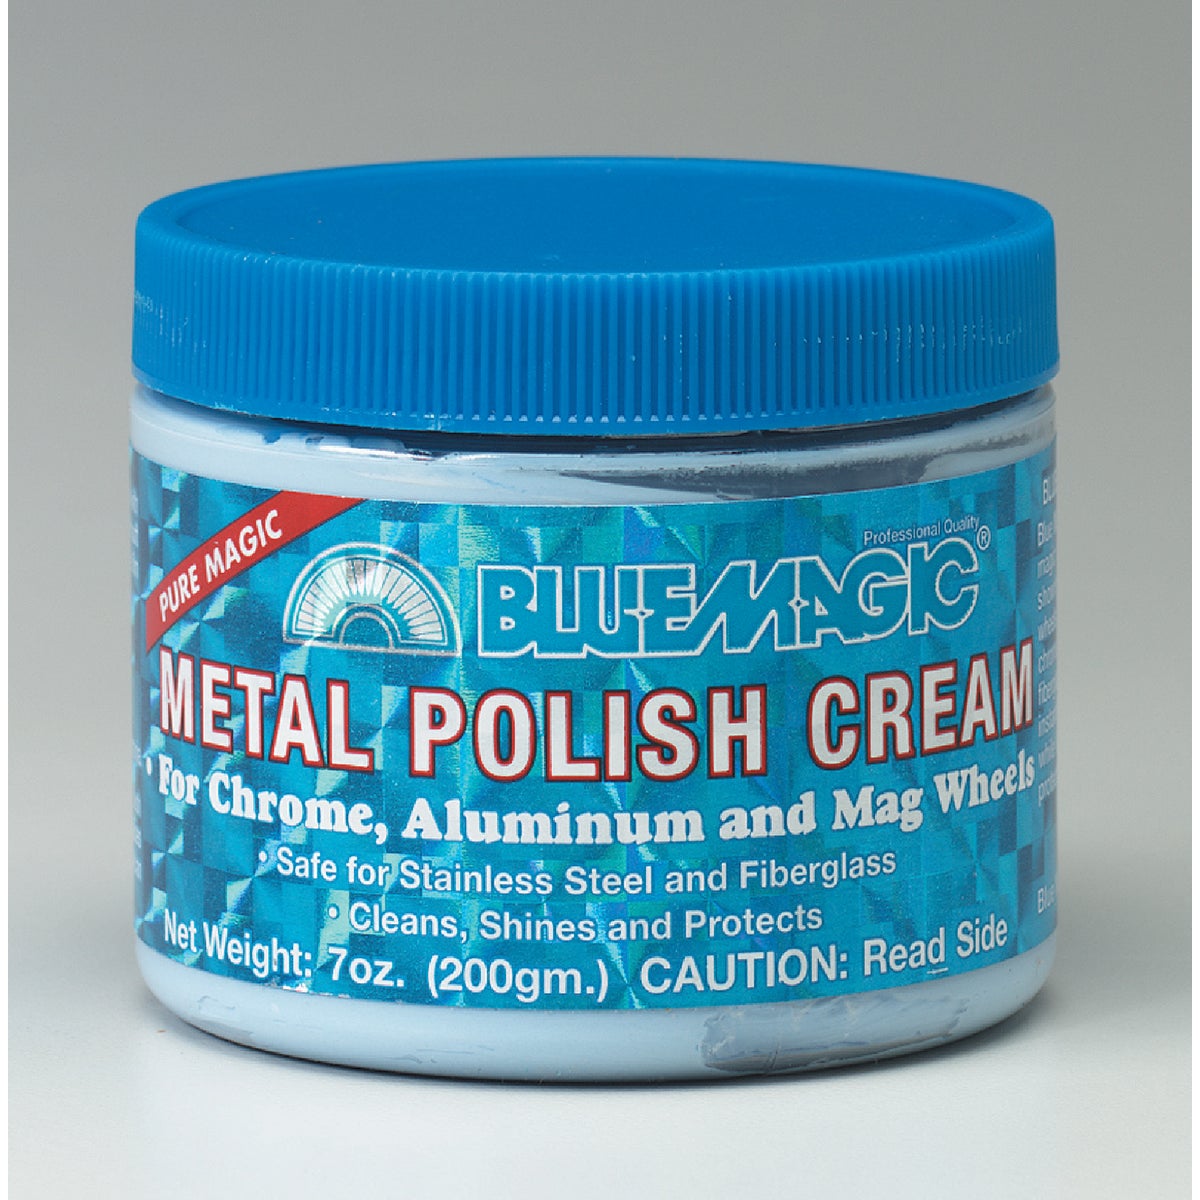 Item 574716, Blue Magic polishes all metal surfaces including coated or lacquered metals